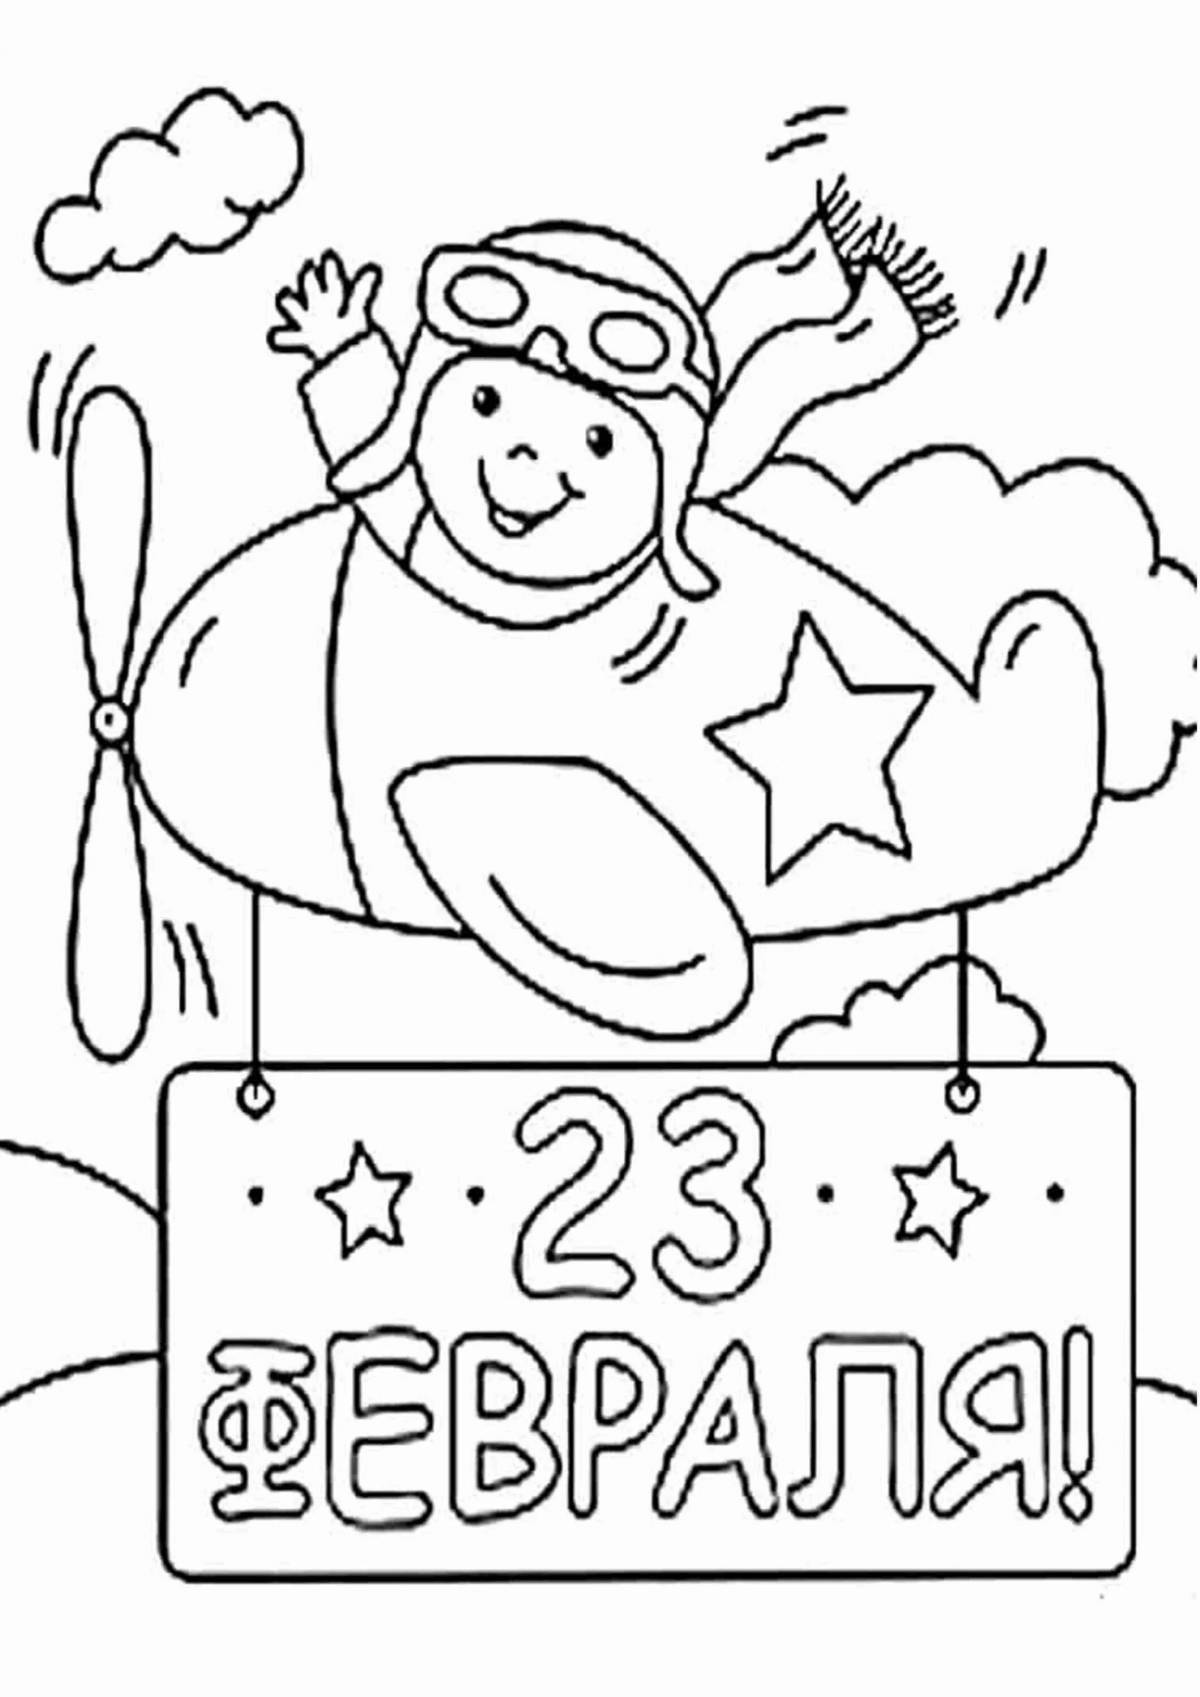 Radiant Protector Day coloring page